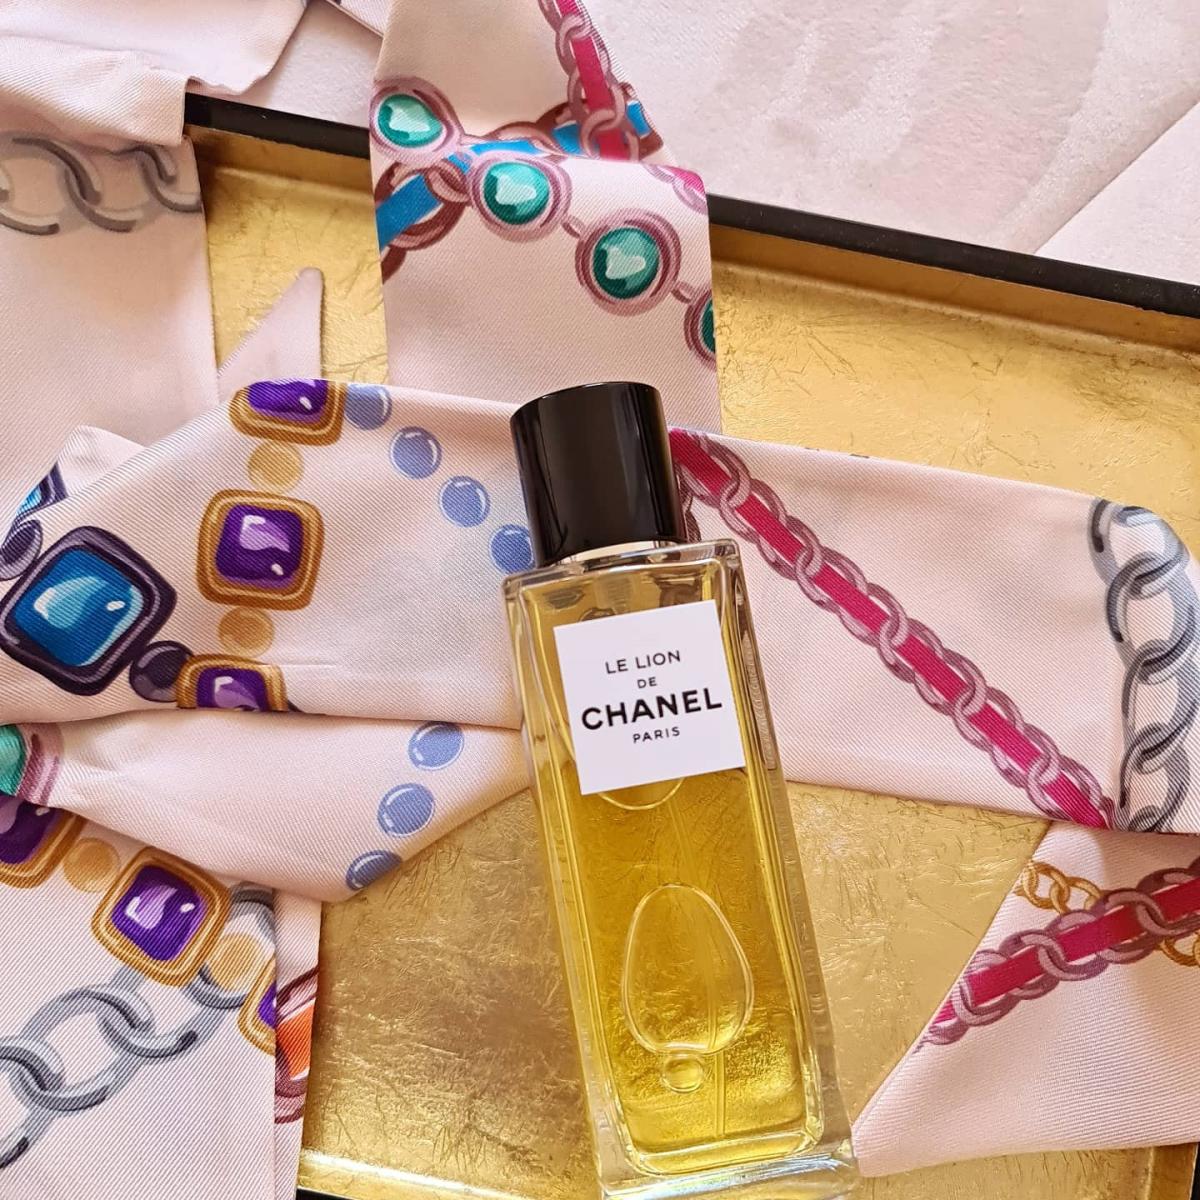 Le Lion de Chanel Chanel perfume - a new fragrance for women and men 2020